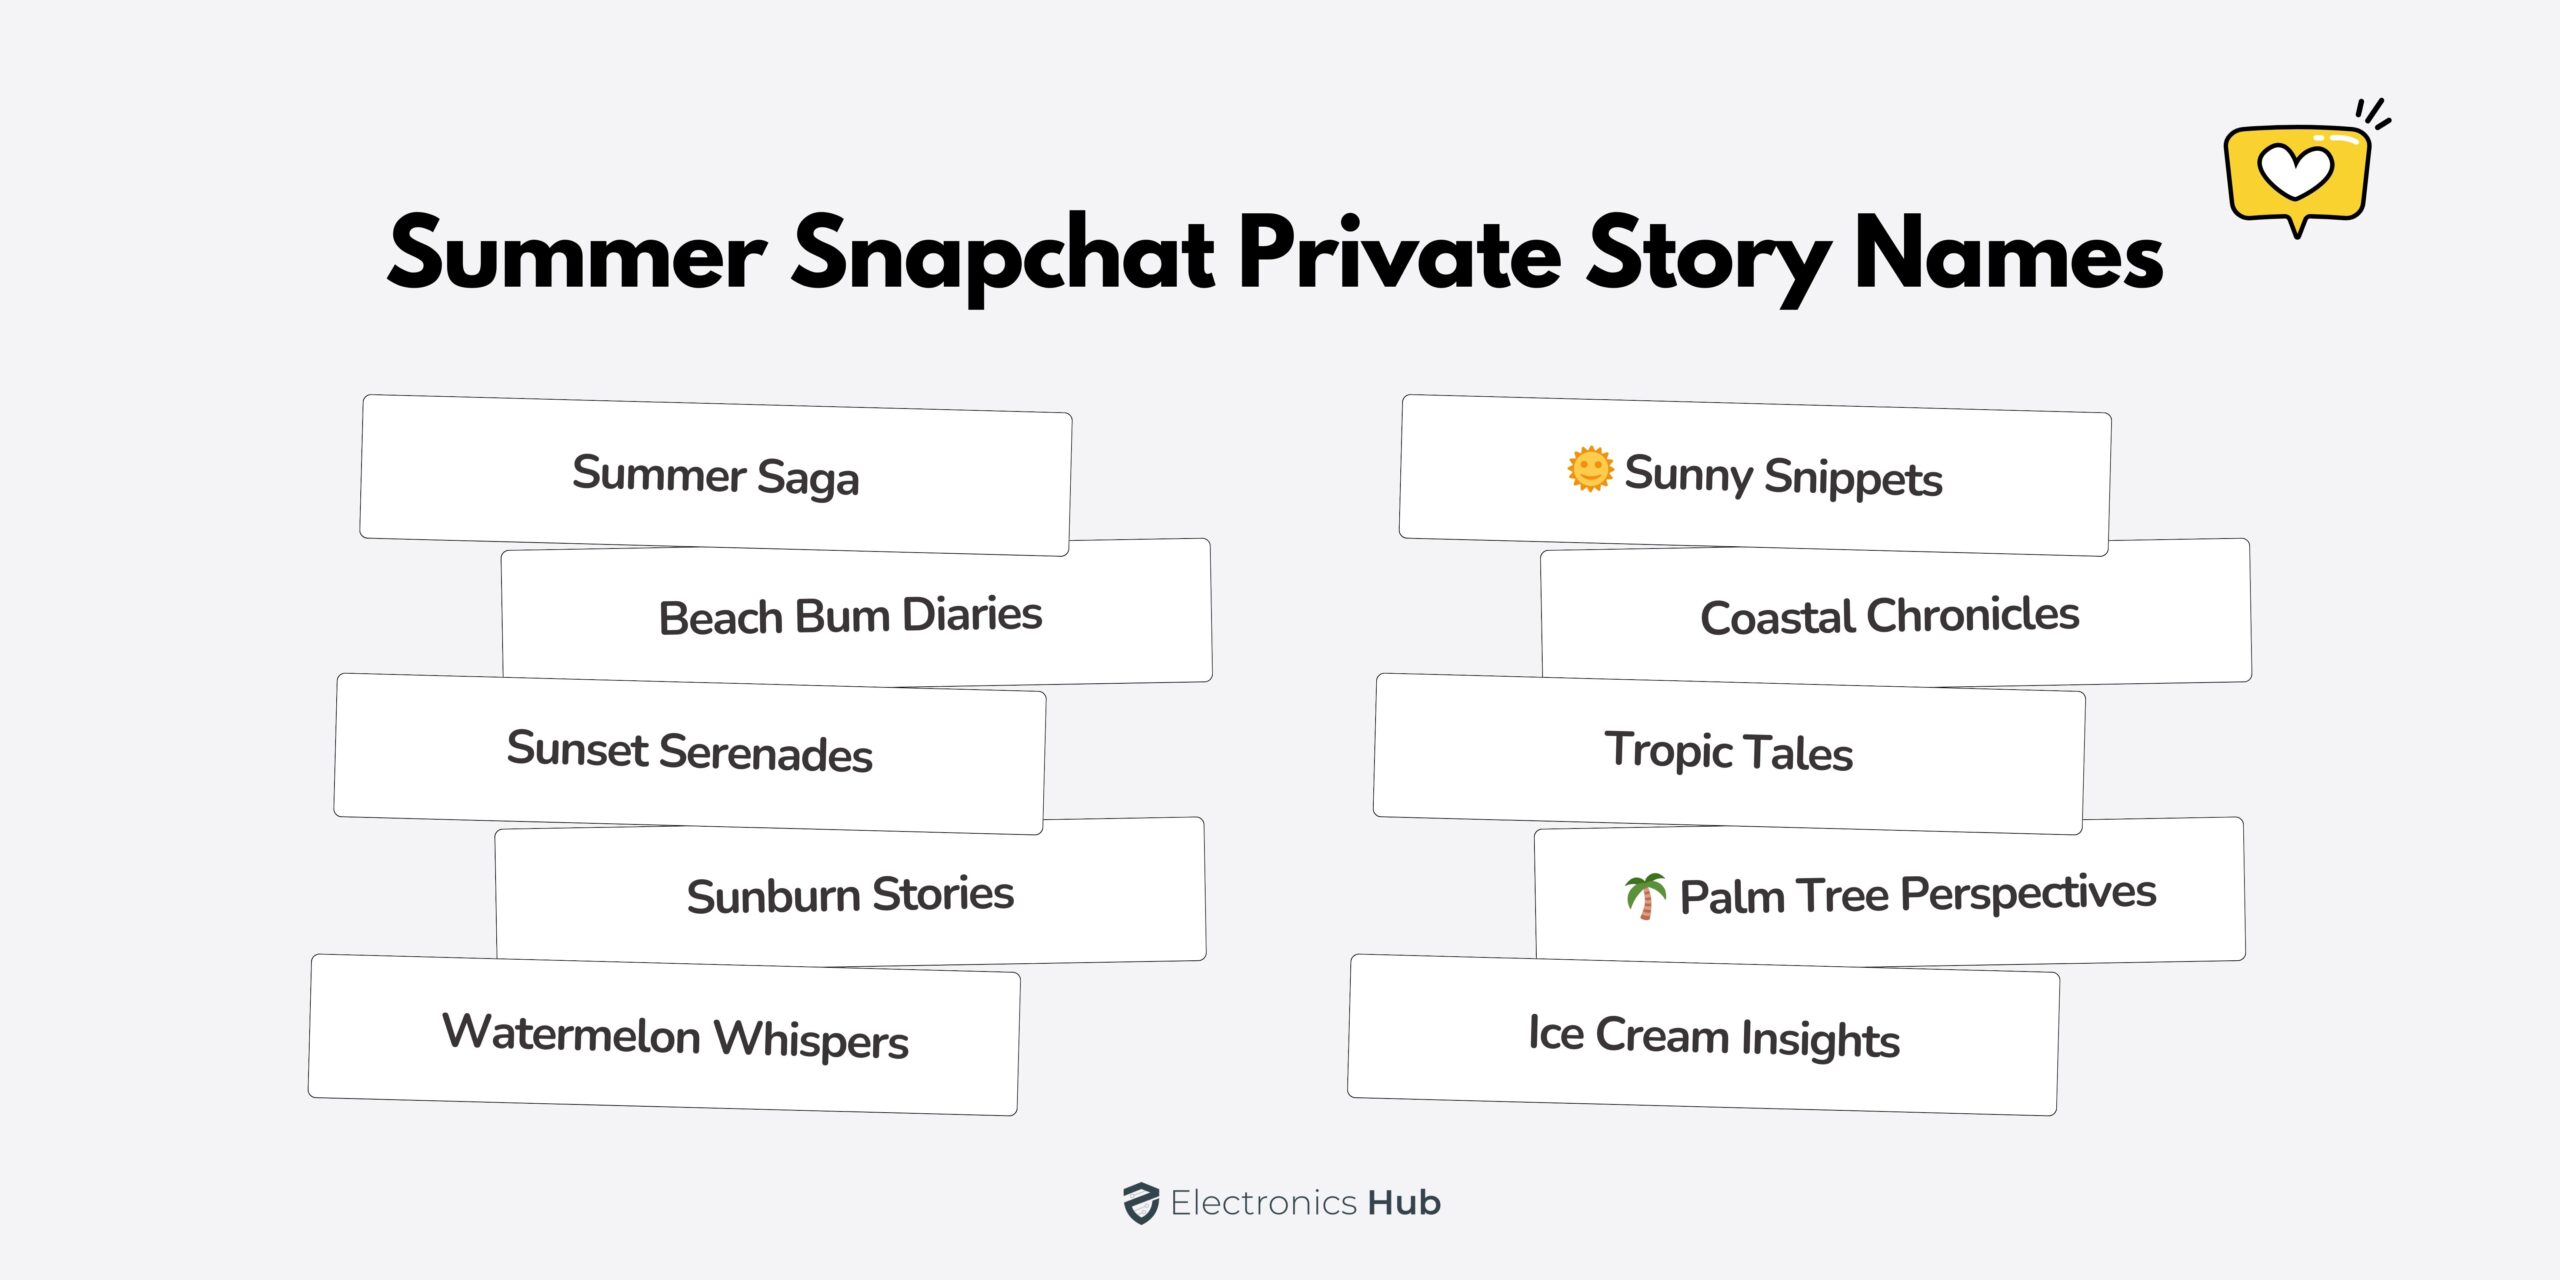 Summer Snapchat Private Story Names